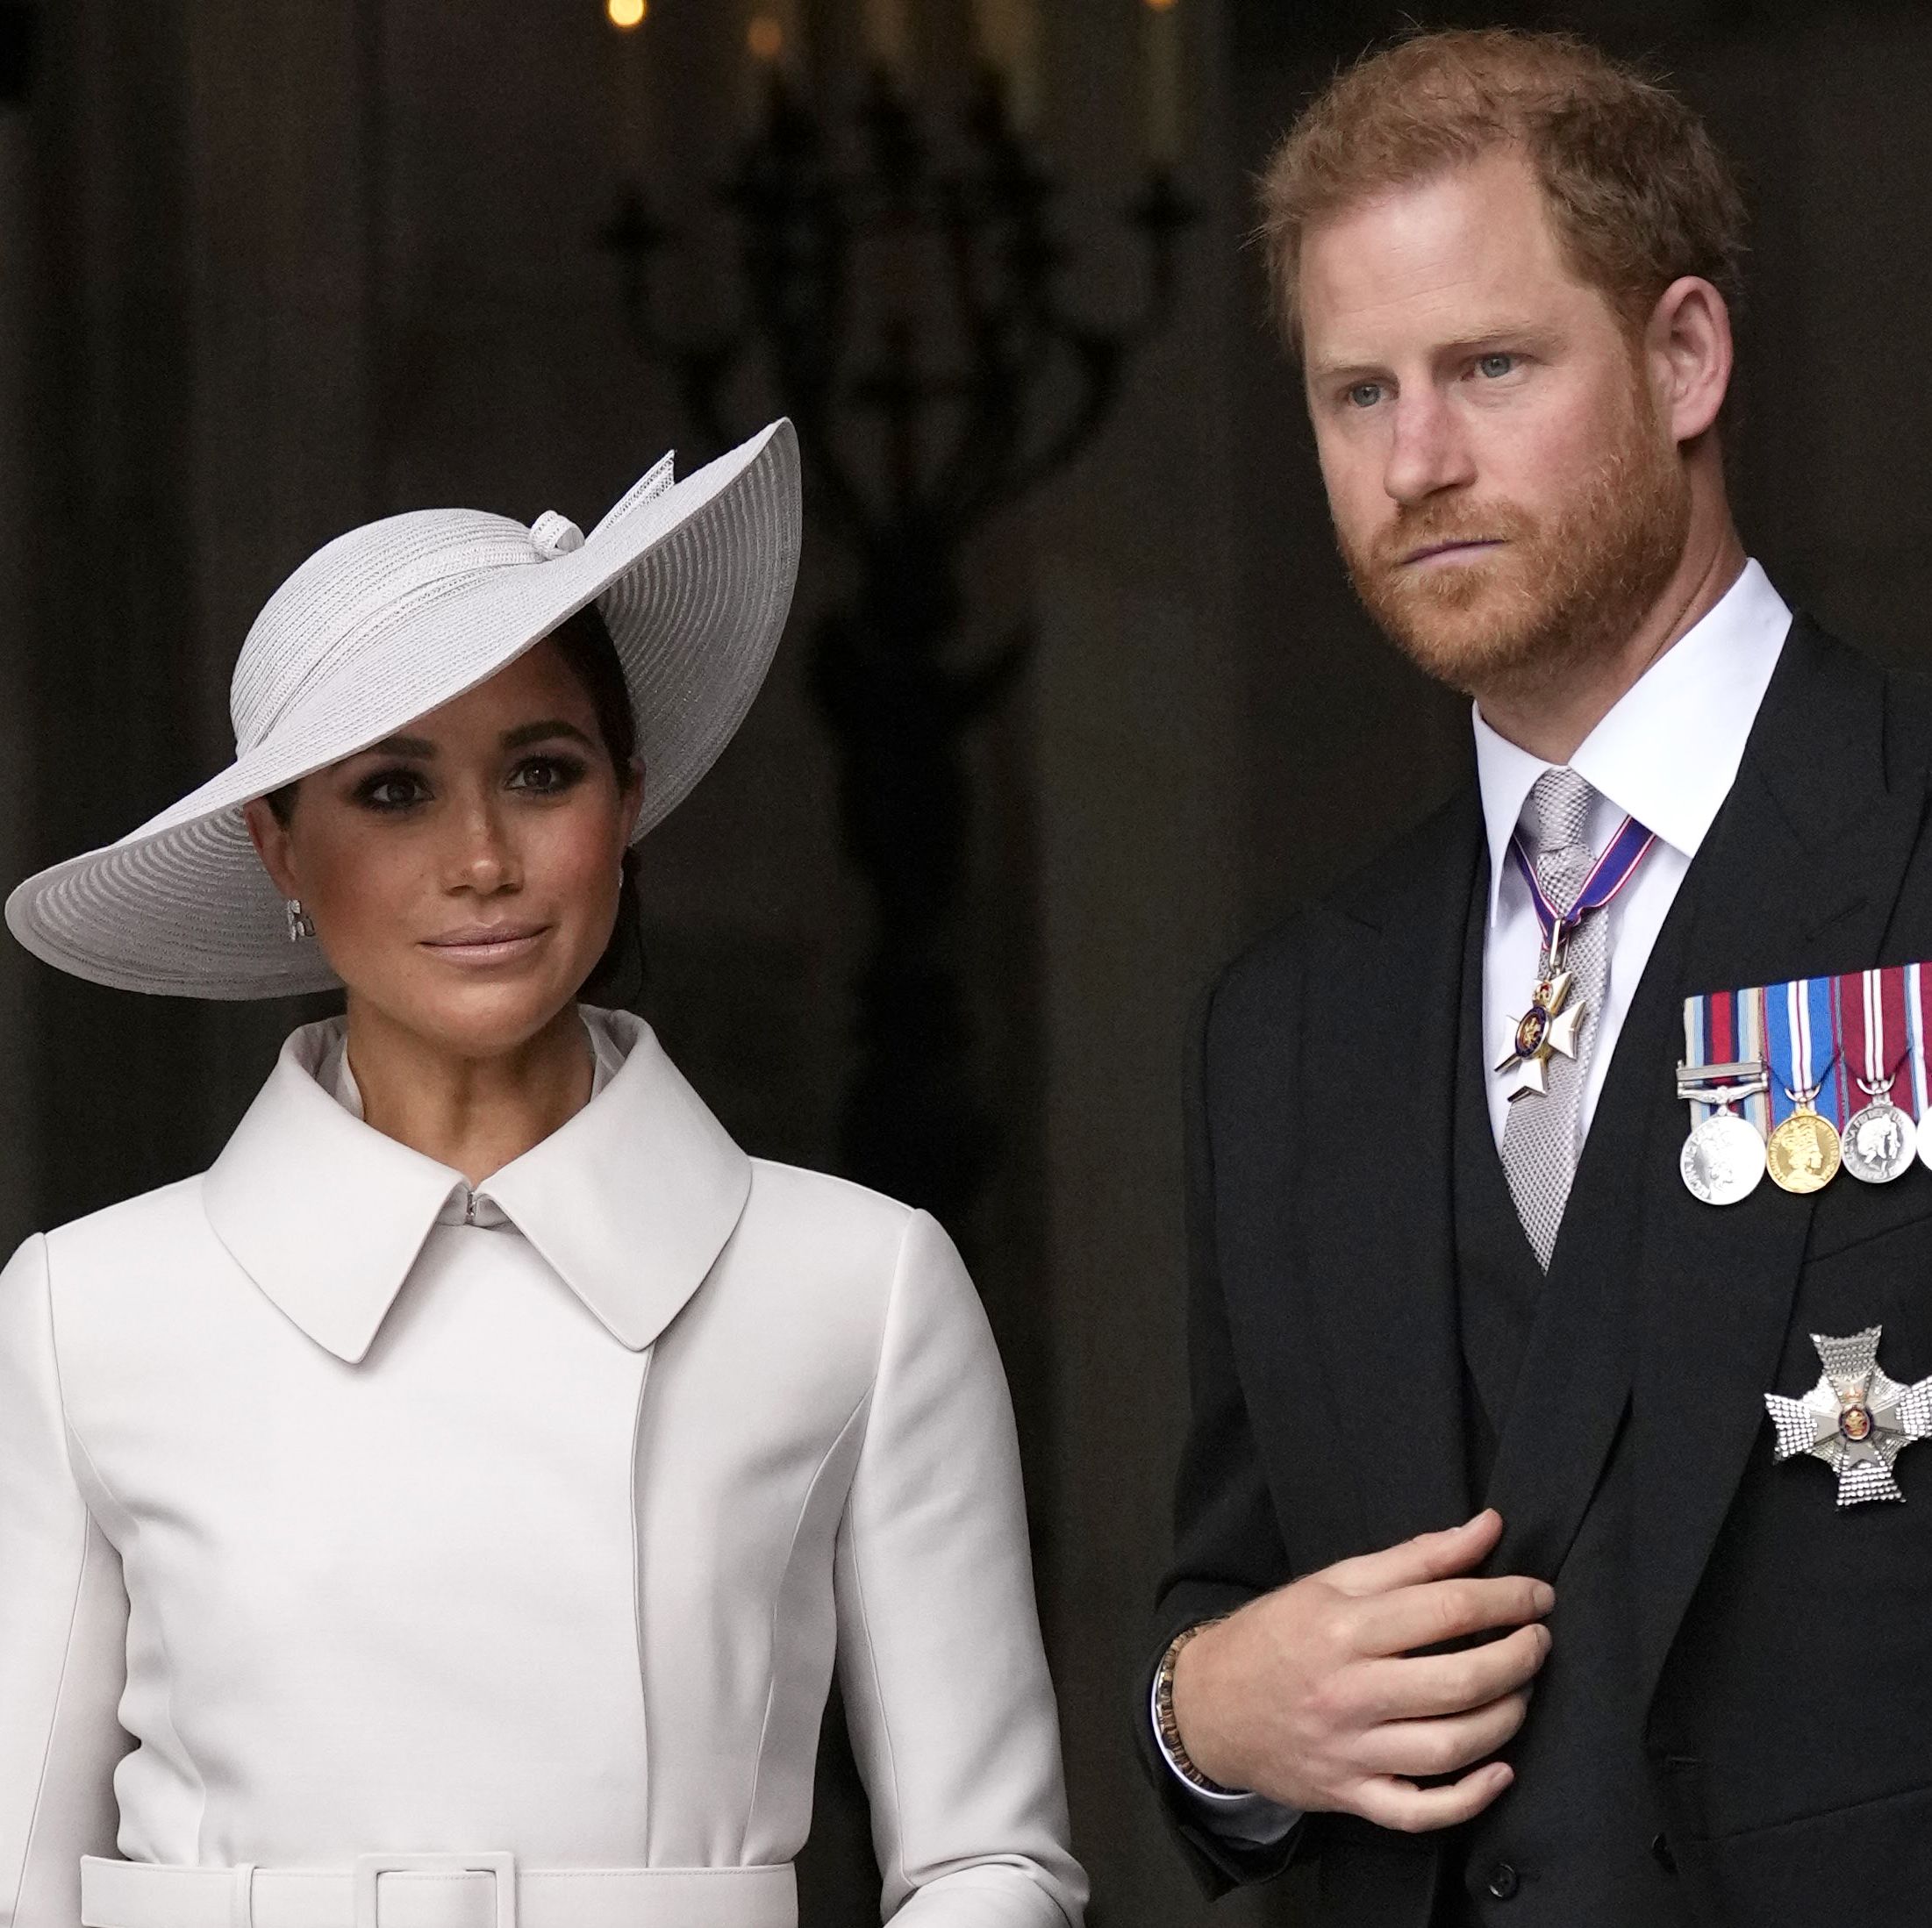 Prince Harry and Meghan Markle Were Involved in a 